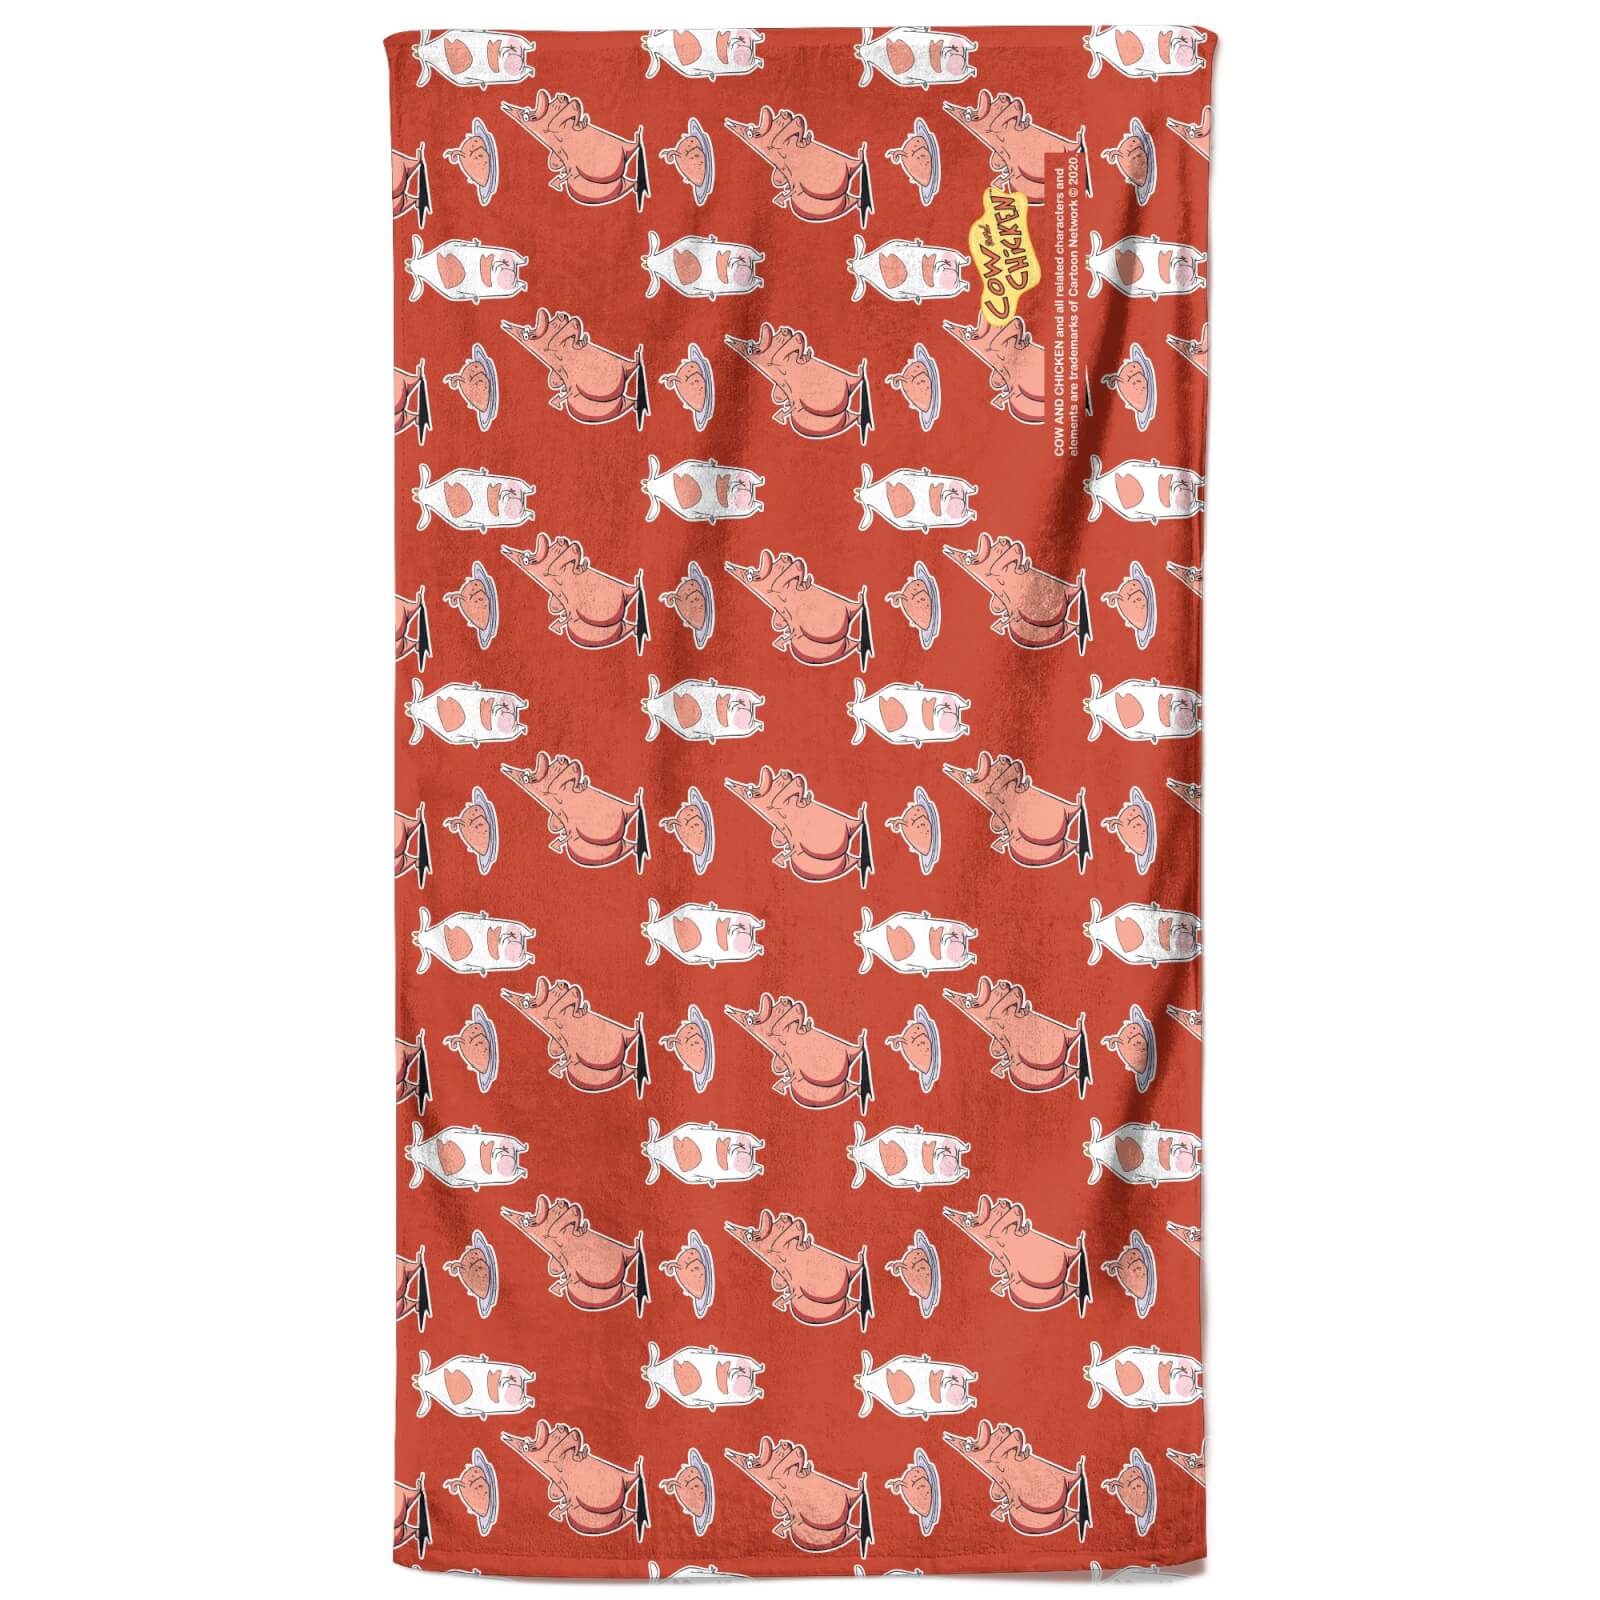 Cow and Chicken Pattern Bath Towel